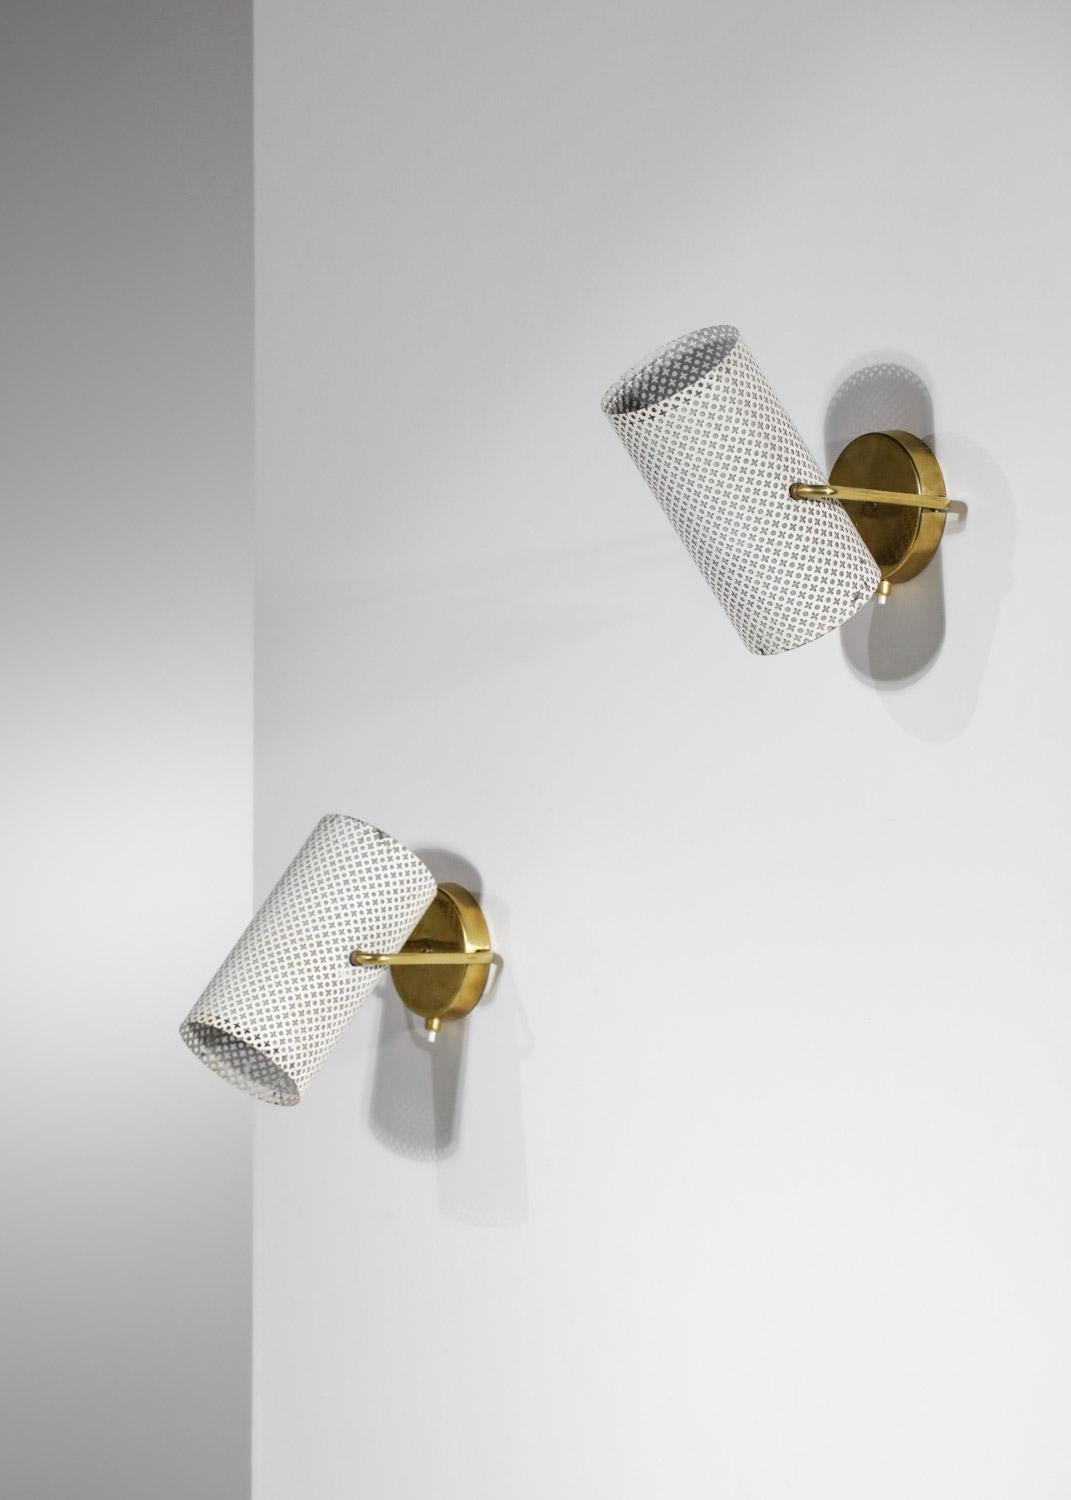 Pair of Perforated Steel Sconces in the Pierre Guariche Style, G685 9